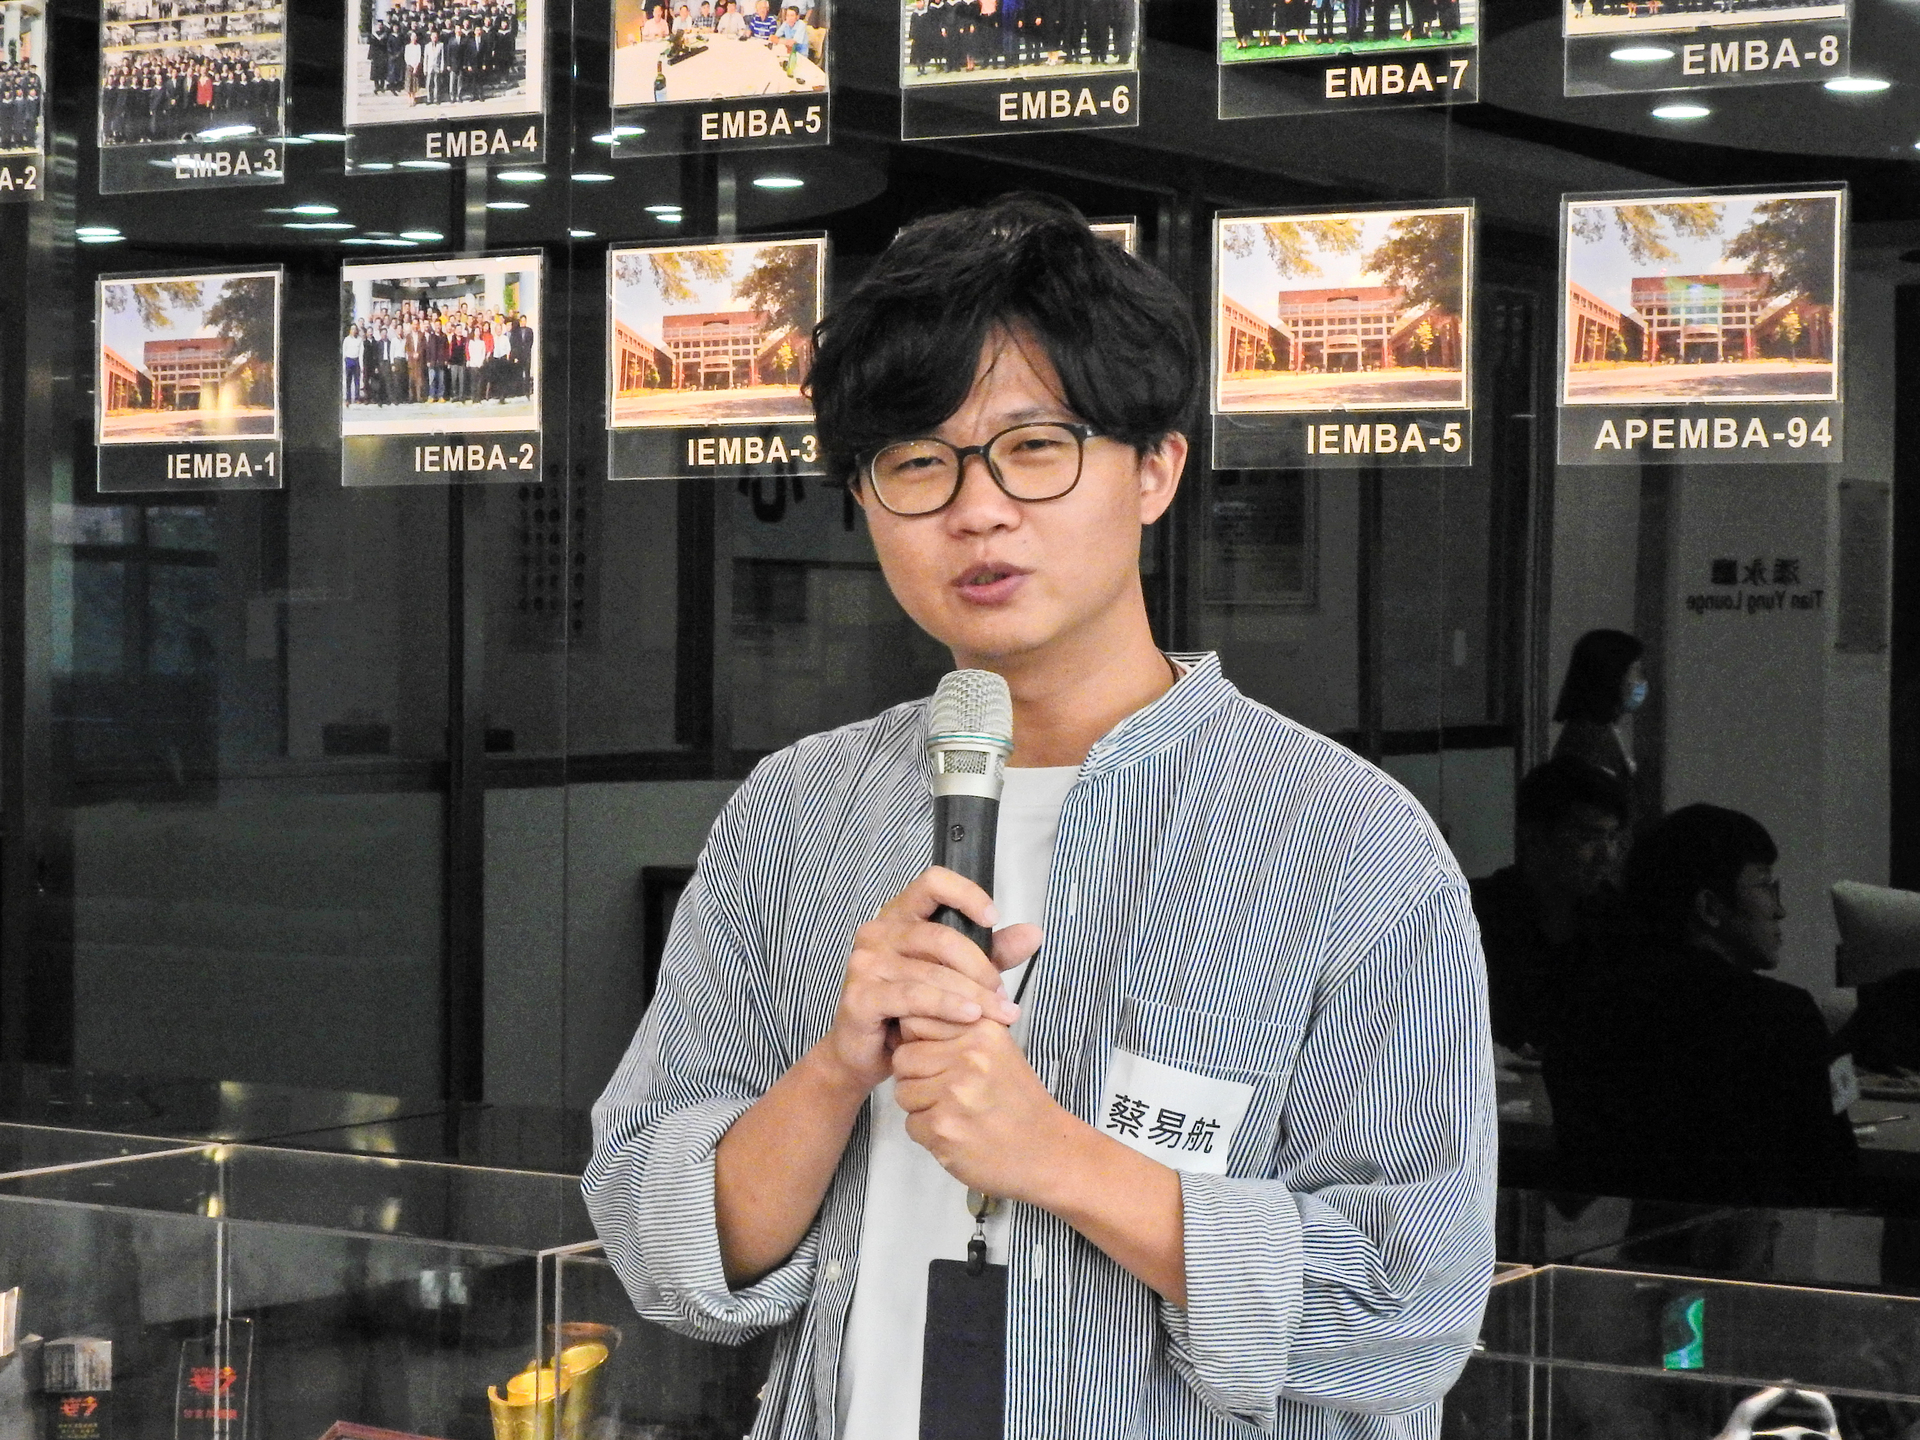 I-hang Tsai, PhD student in the Department of Information Management, generously shared his research direction